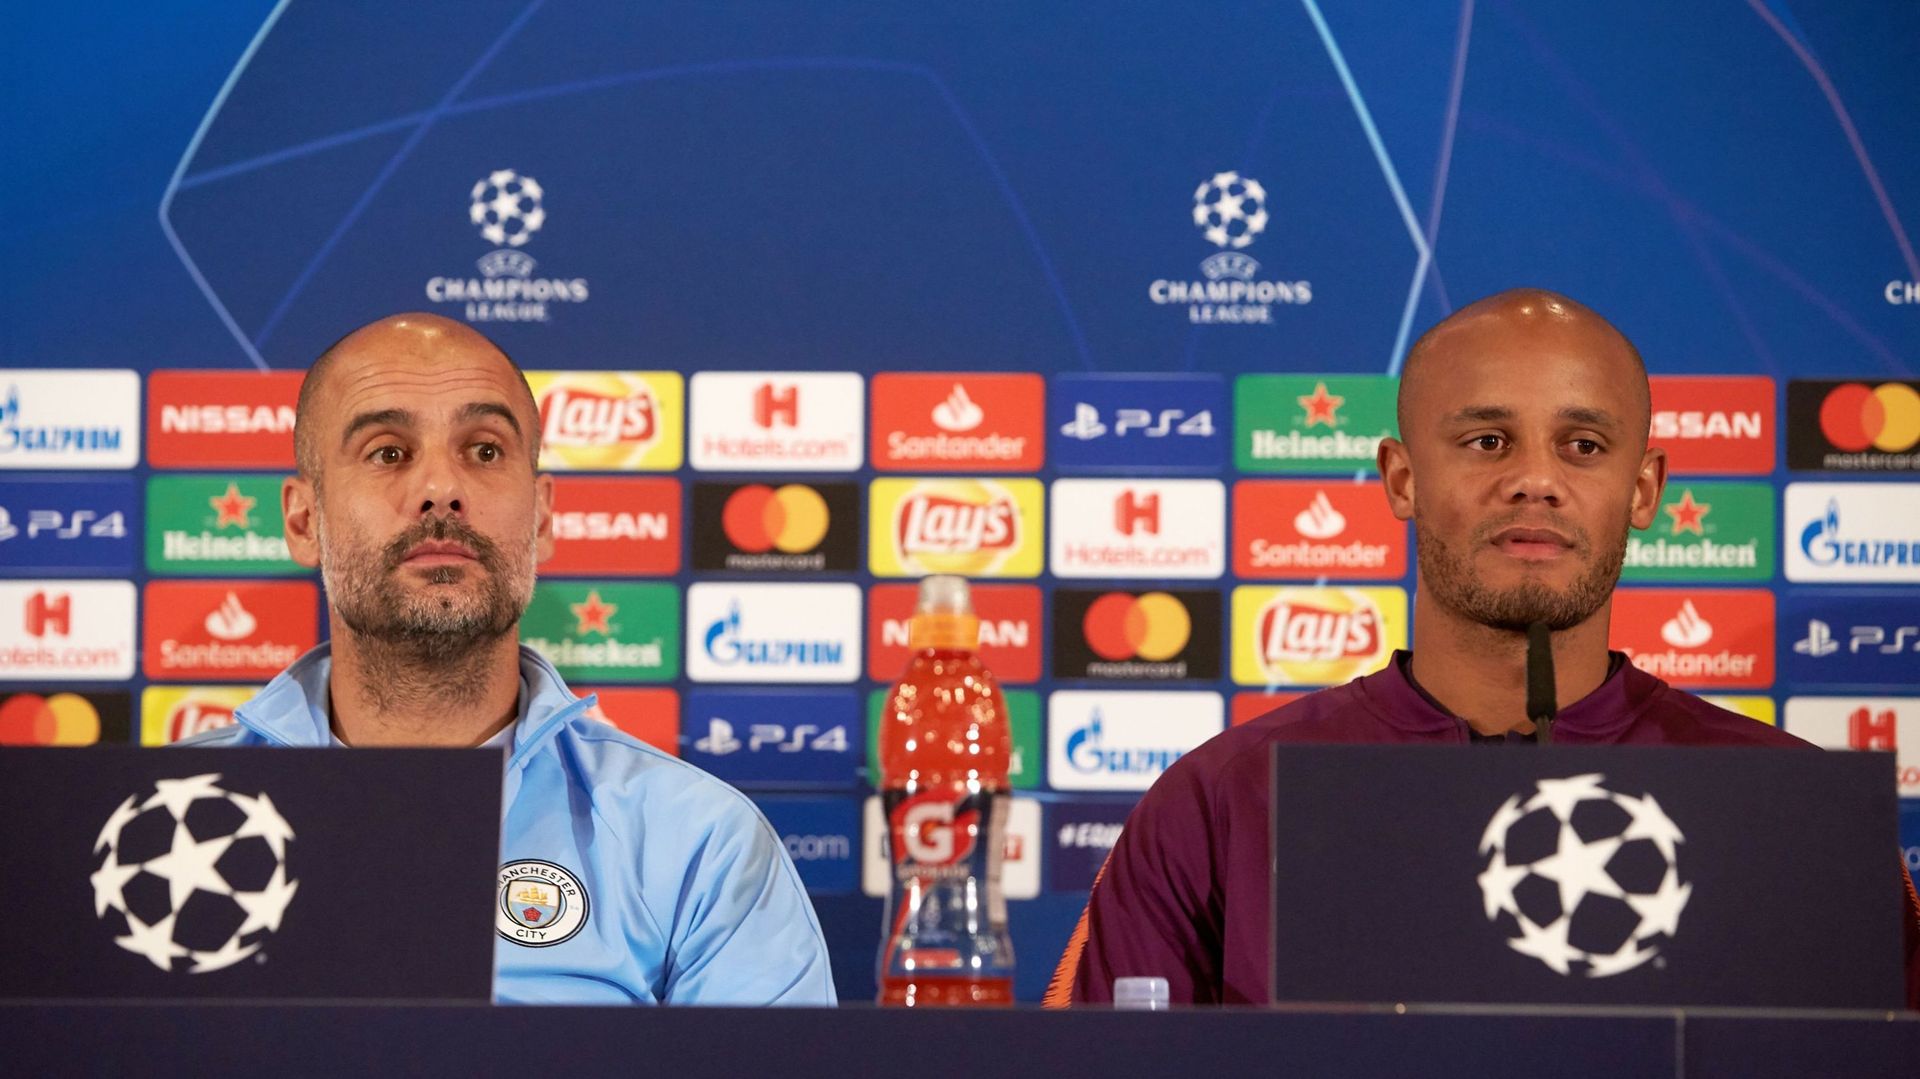 UEFA Champions League – Manchester City Press conference